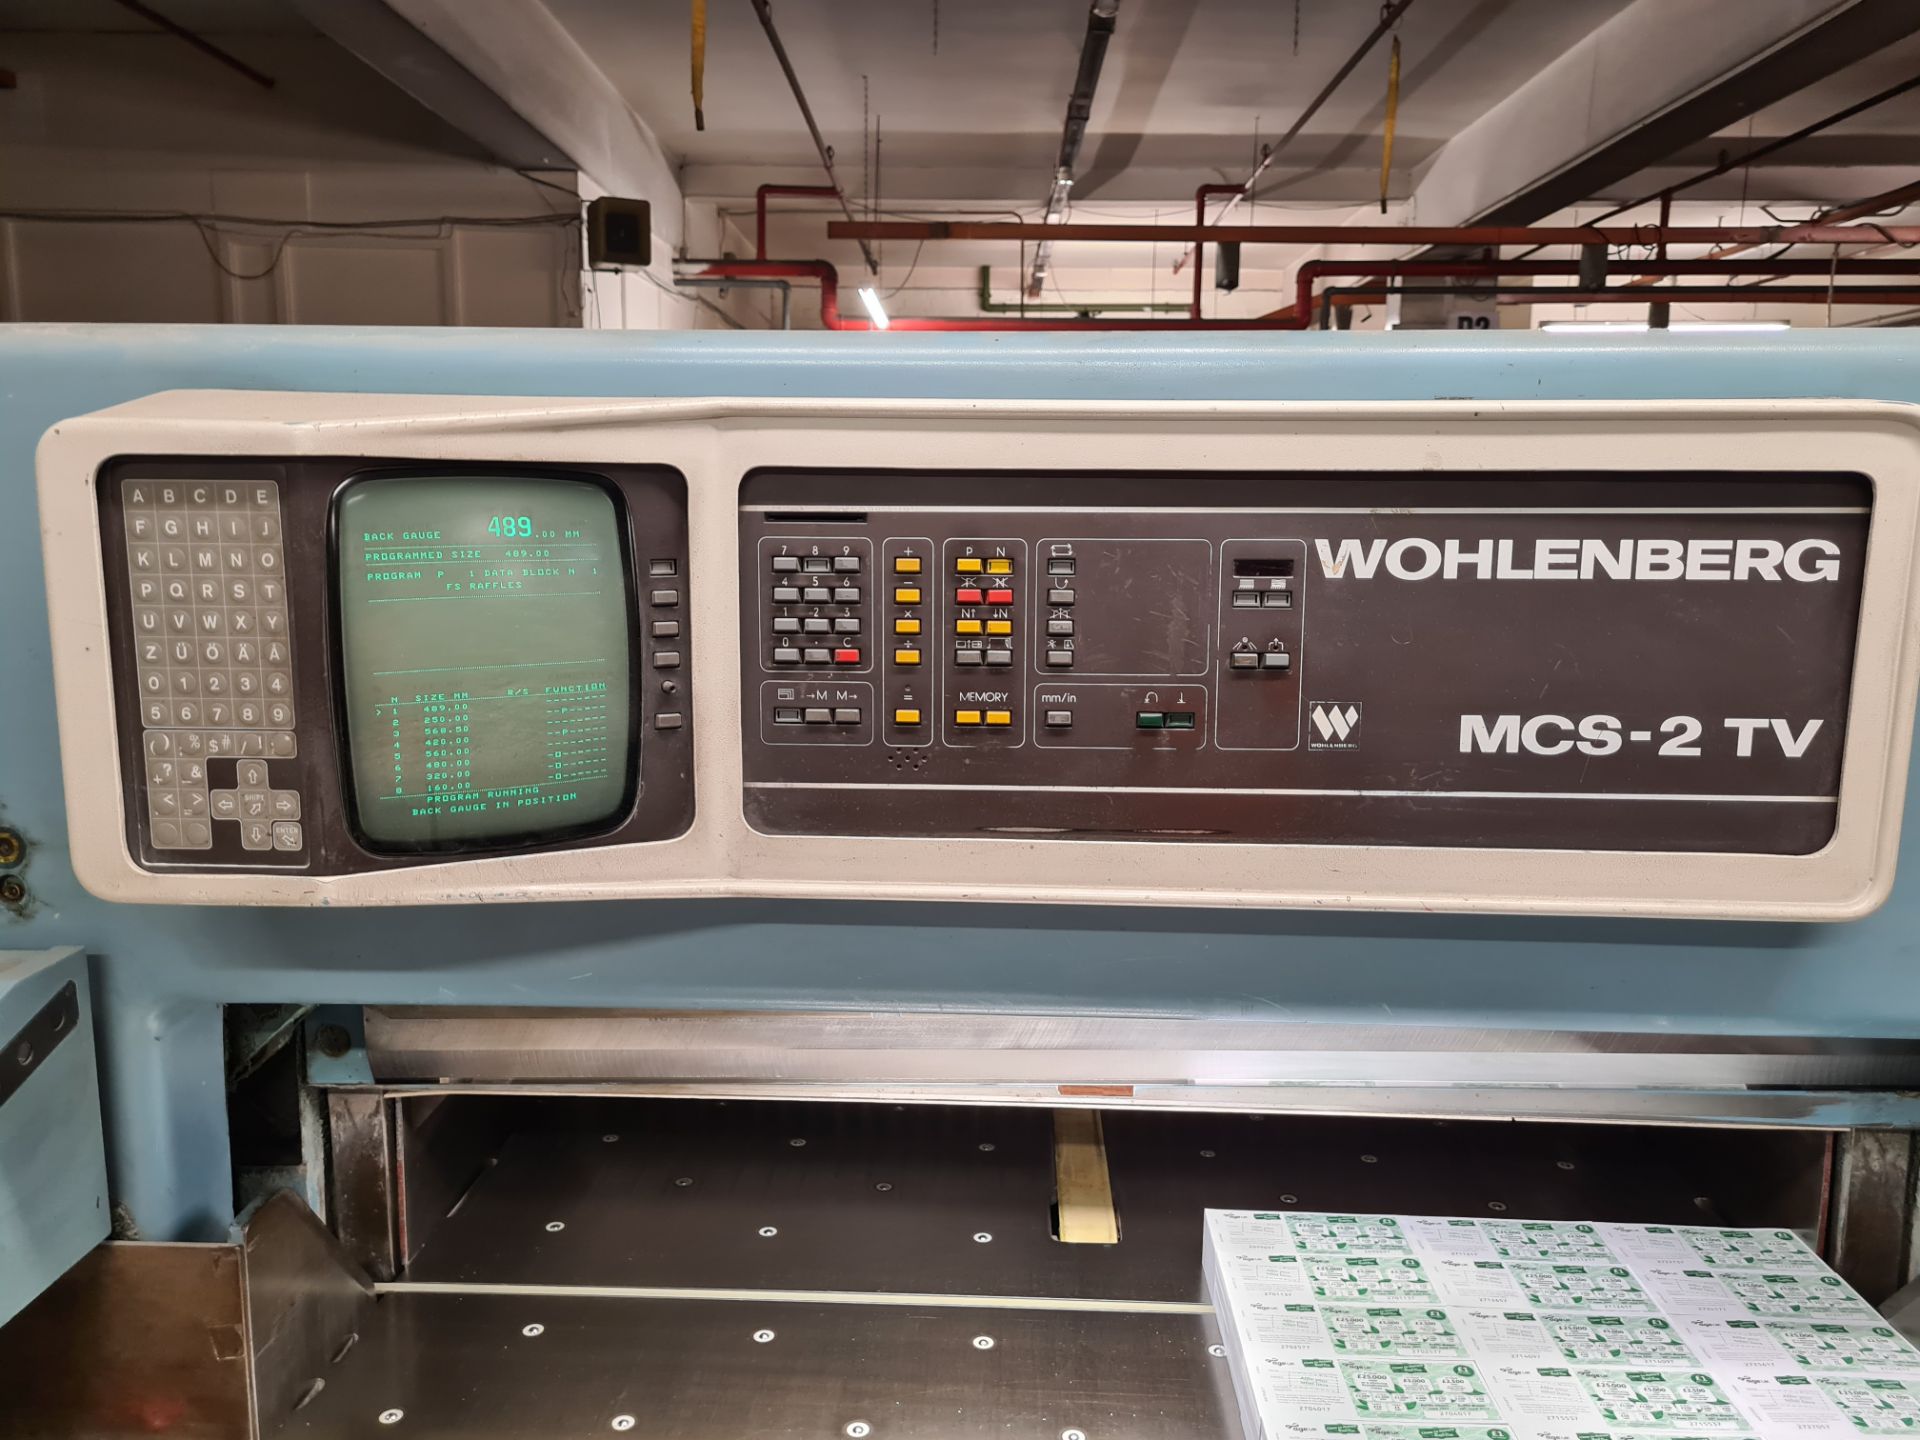 Wohlenberg 115 Guillotine, machine no. 3381-037, with MCS-2 TV controlsPlease read the following - Image 2 of 6